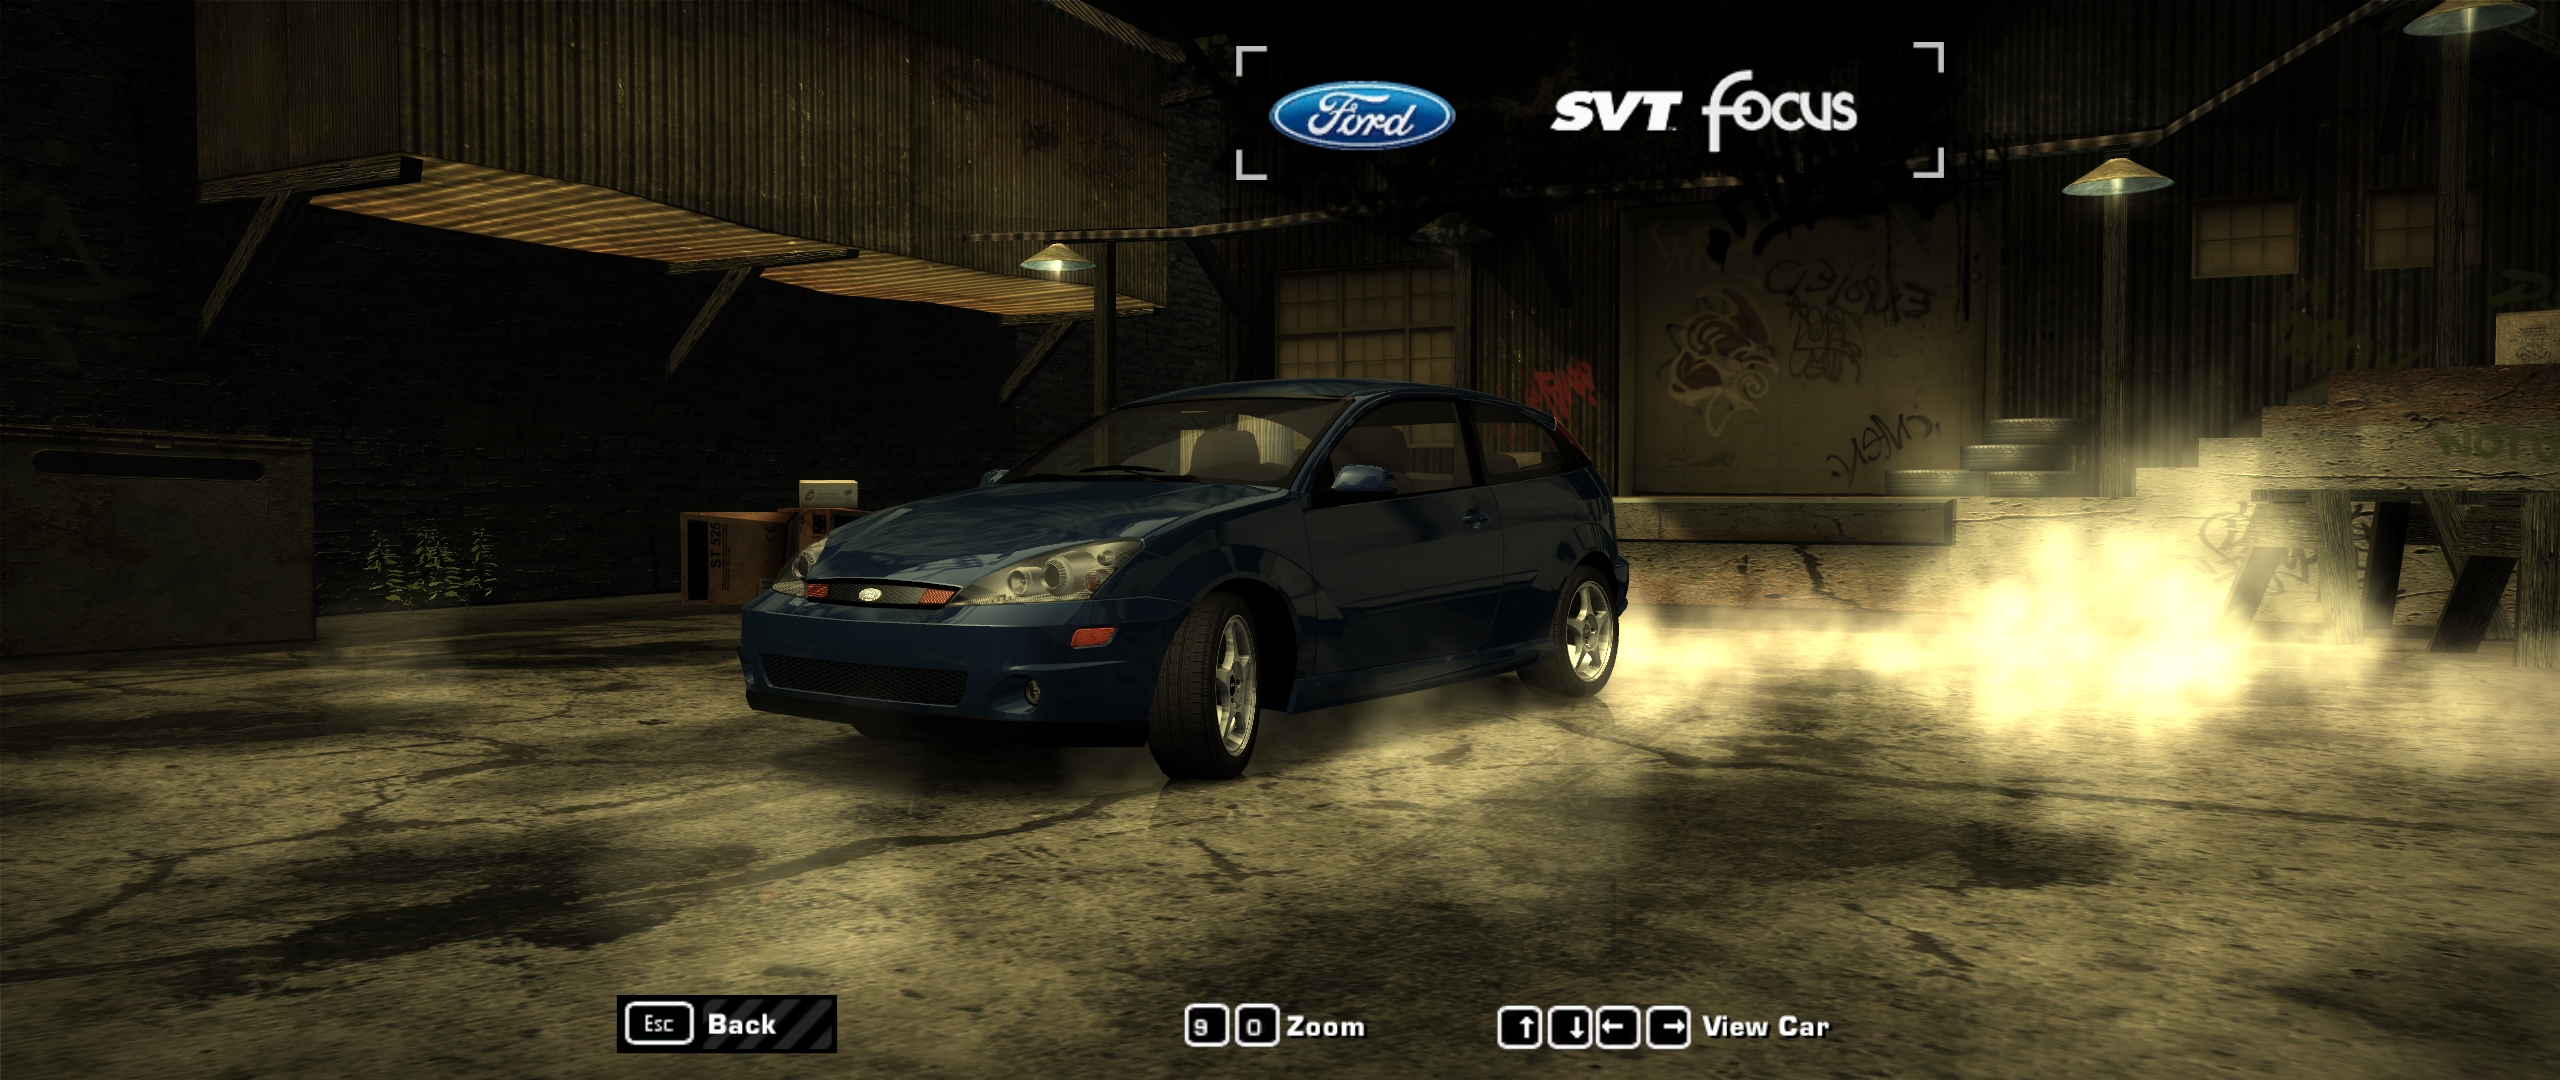 Need For Speed Most Wanted 2003 Ford SVT Focus